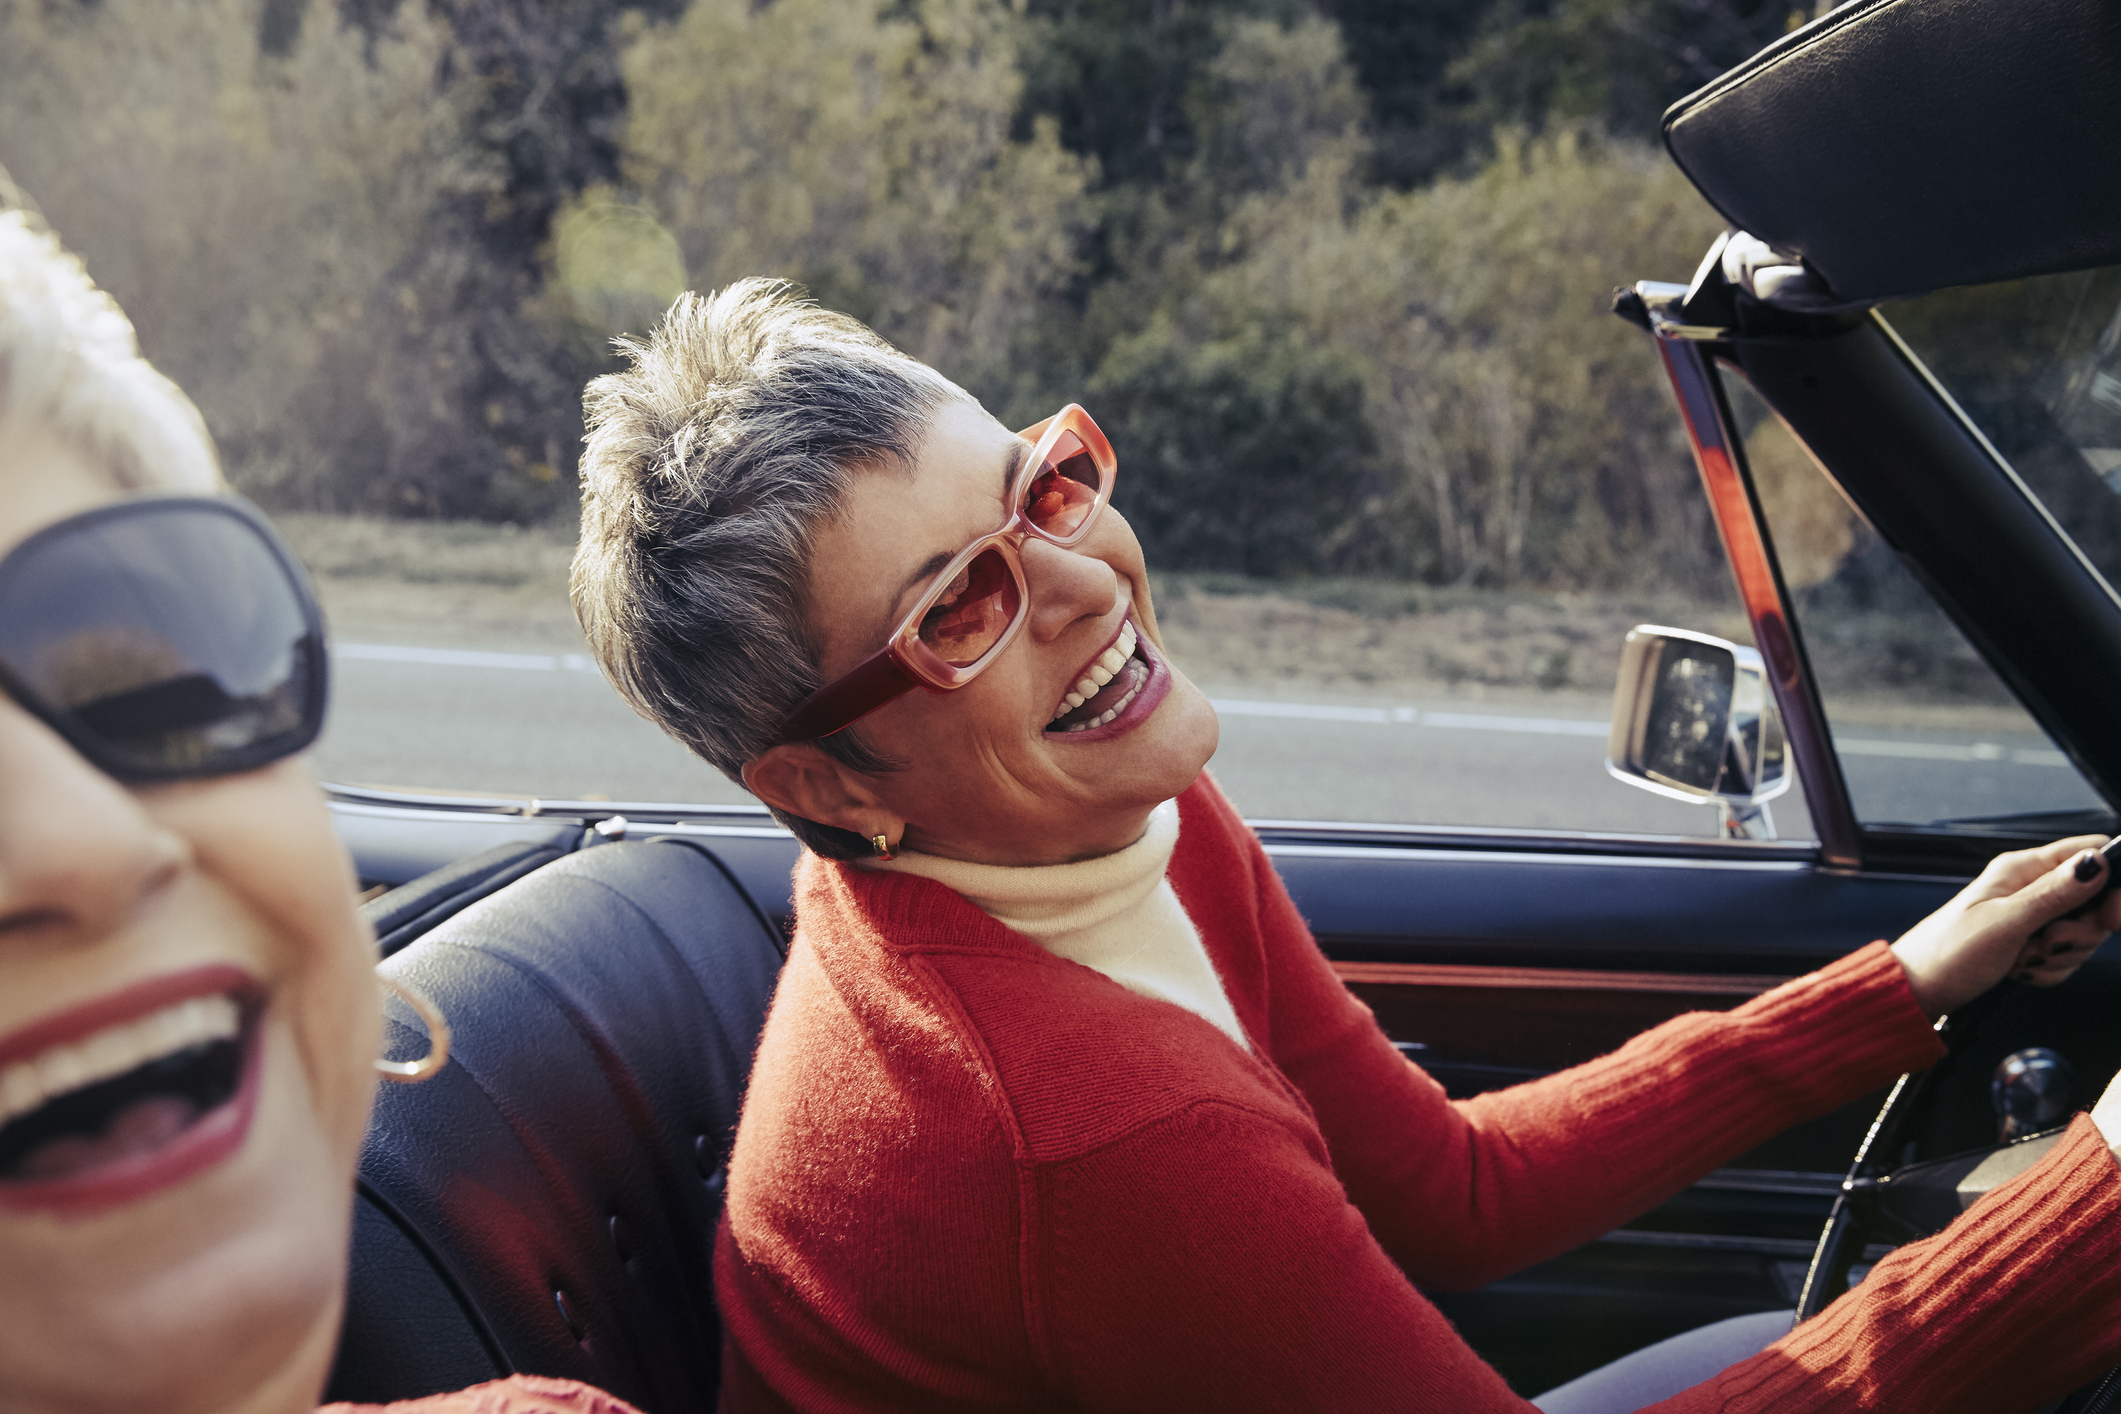 Two joyful women in a convertible, one driving and smiling broadly at the passenger